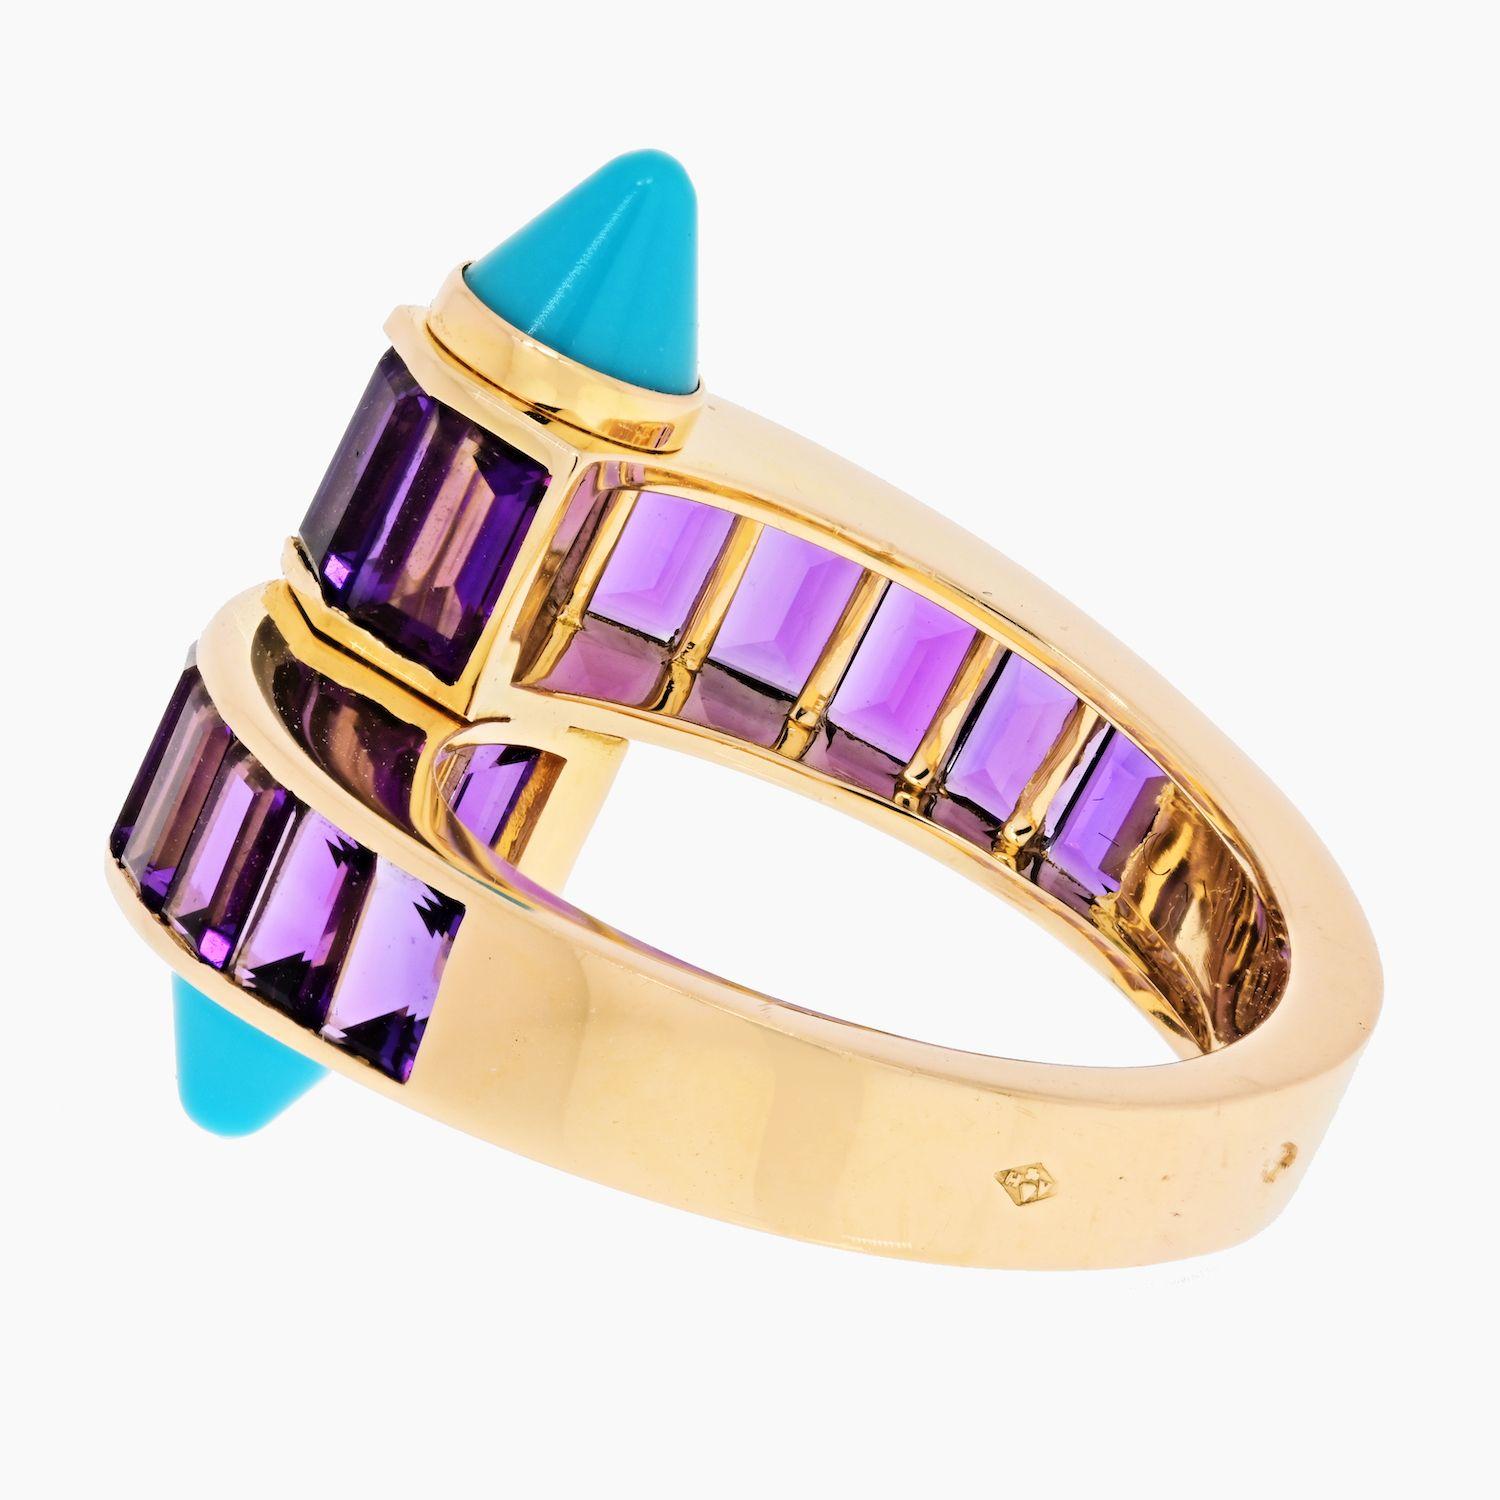 Crafted in 18K rose gold; set with caliber-cut amethyst and cone shape turquoise; measures 1 inch at widest section; ring size 8-1/2; weight 12.60 g.